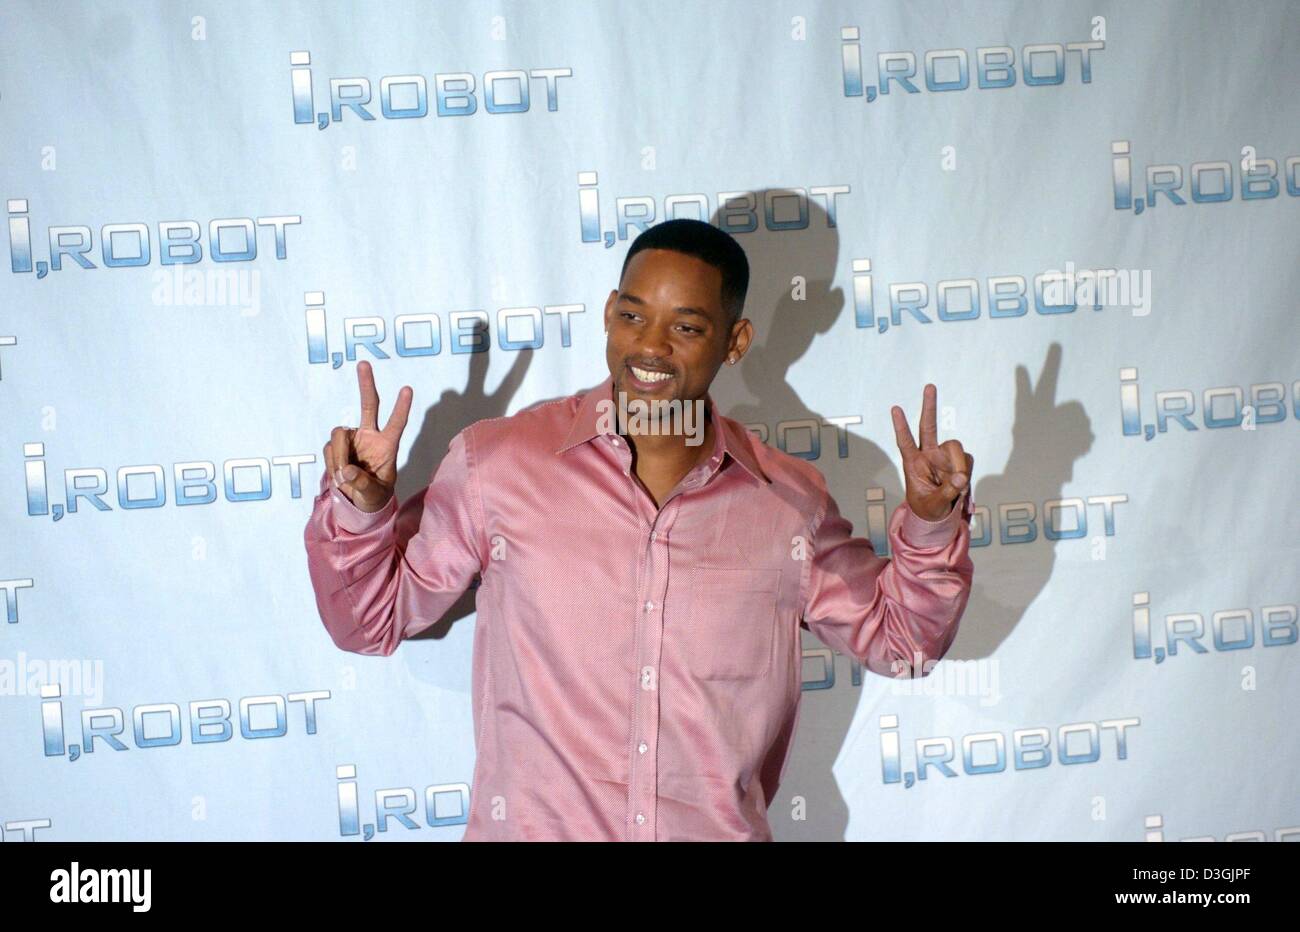 (dpa) - US actor Will Smith smiles and poses as he promotes his new film 'I, Robot' during a photo opportunity in Berlin, Monday, 02 August 2004. In the sci-fi action thriller, directed by Alex Proyas, Smith plays the part of a cyber-cop who fights power-hungry robots. The film is going to be released in Germany on 5 August 2004. Stock Photo